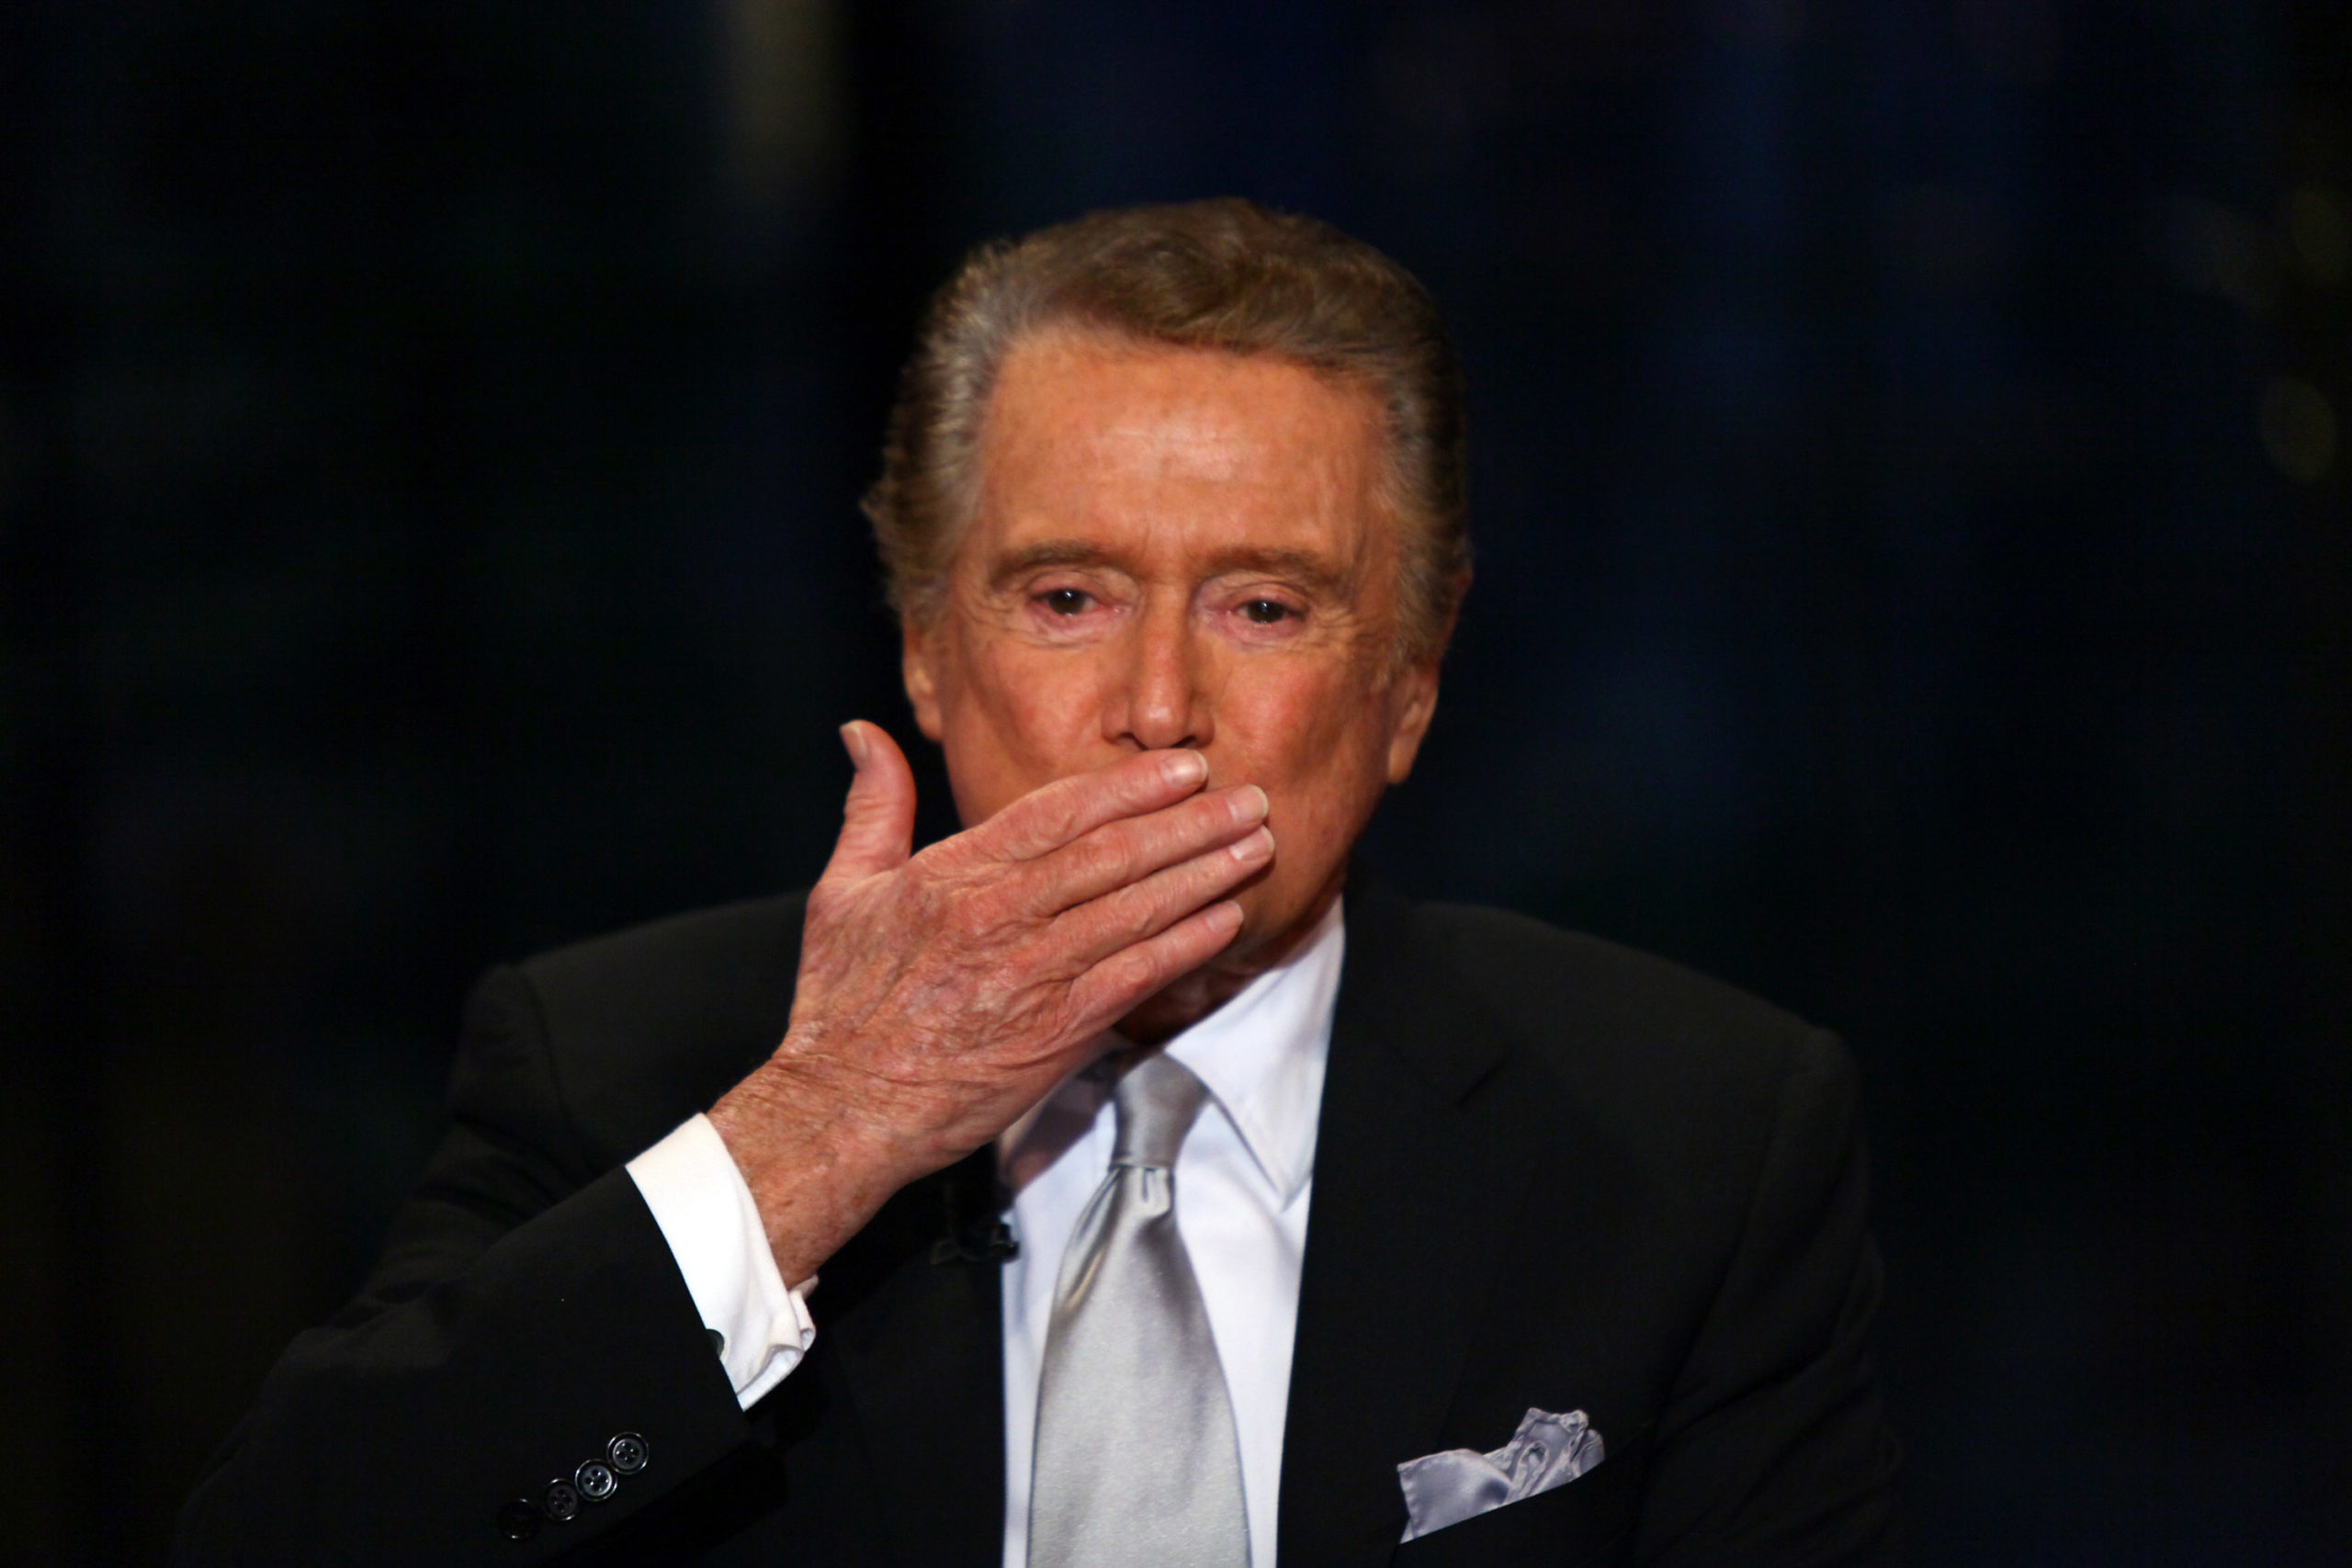 Regis Philbin is seen on set during the final show of 'Live! with Regis and Kelly' on Nov. 18, 2011, in New York City.